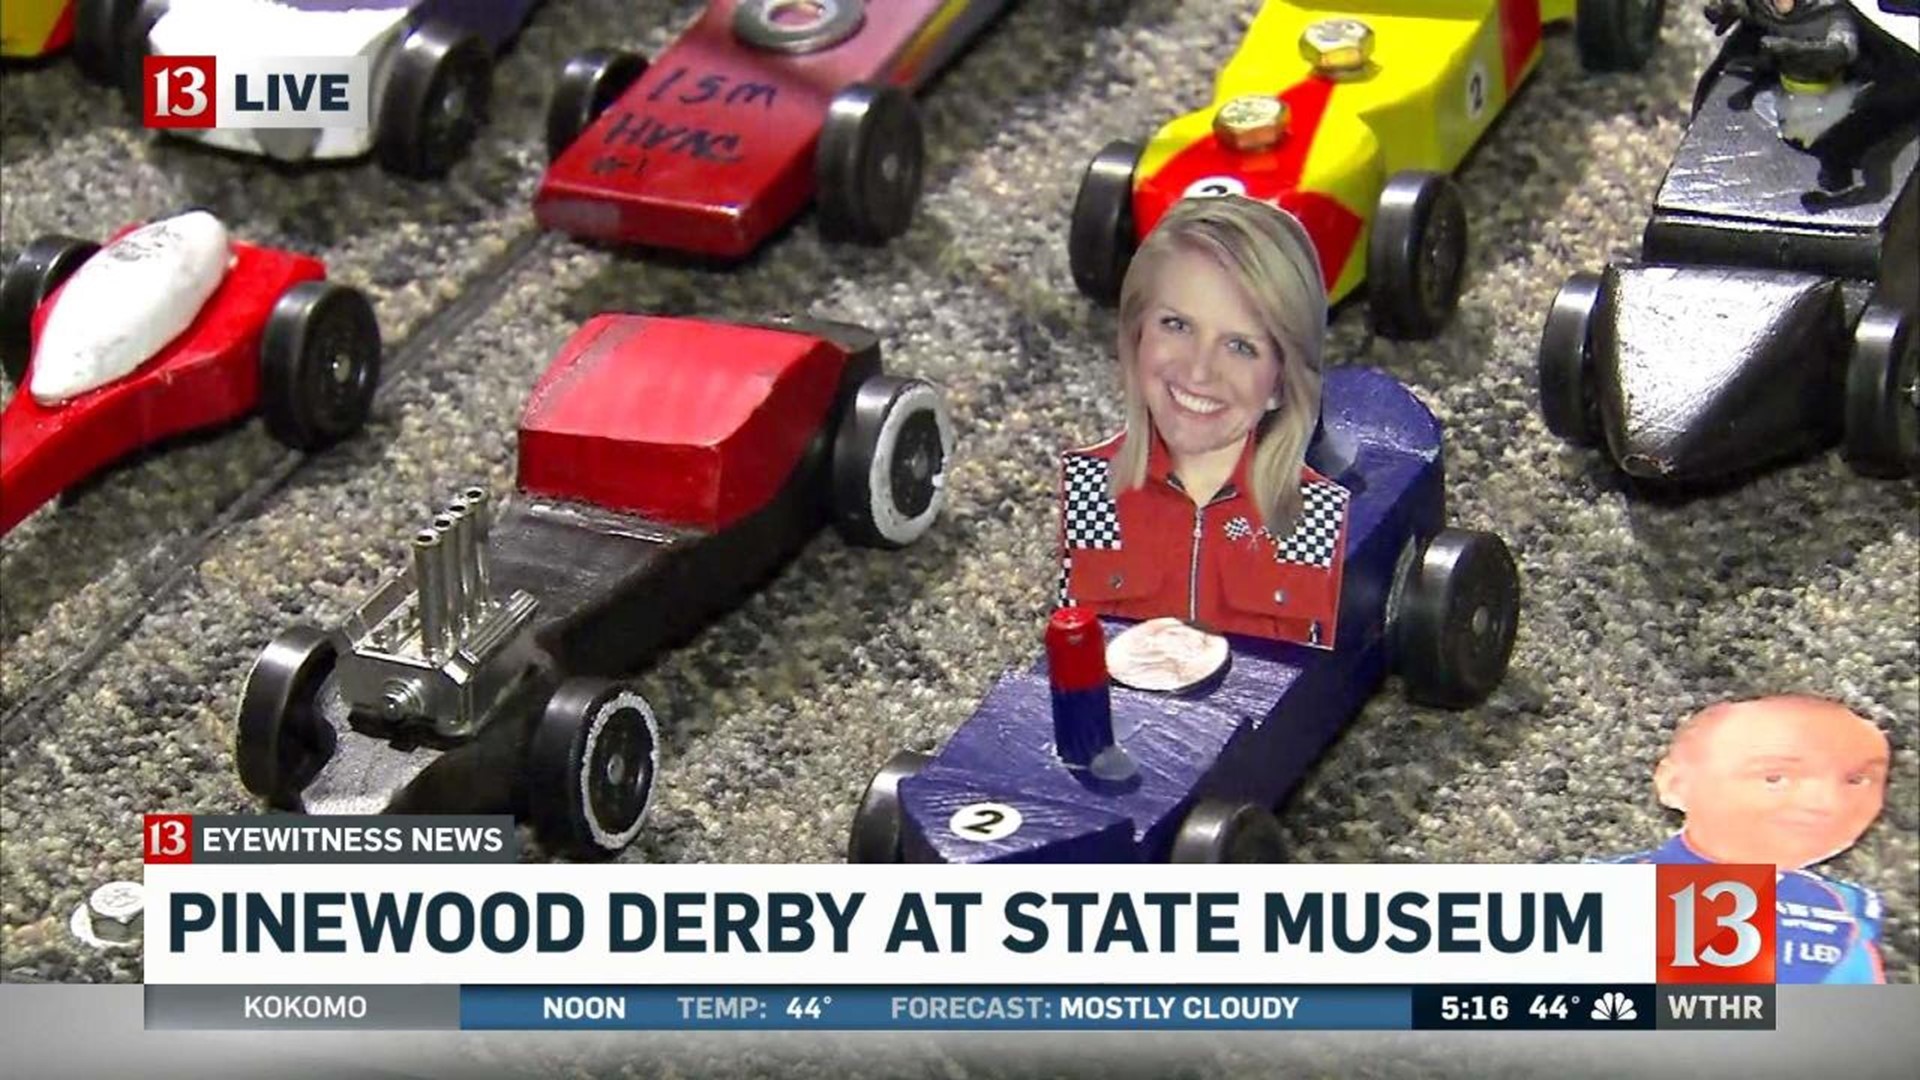 Pinewood Derby at state museum